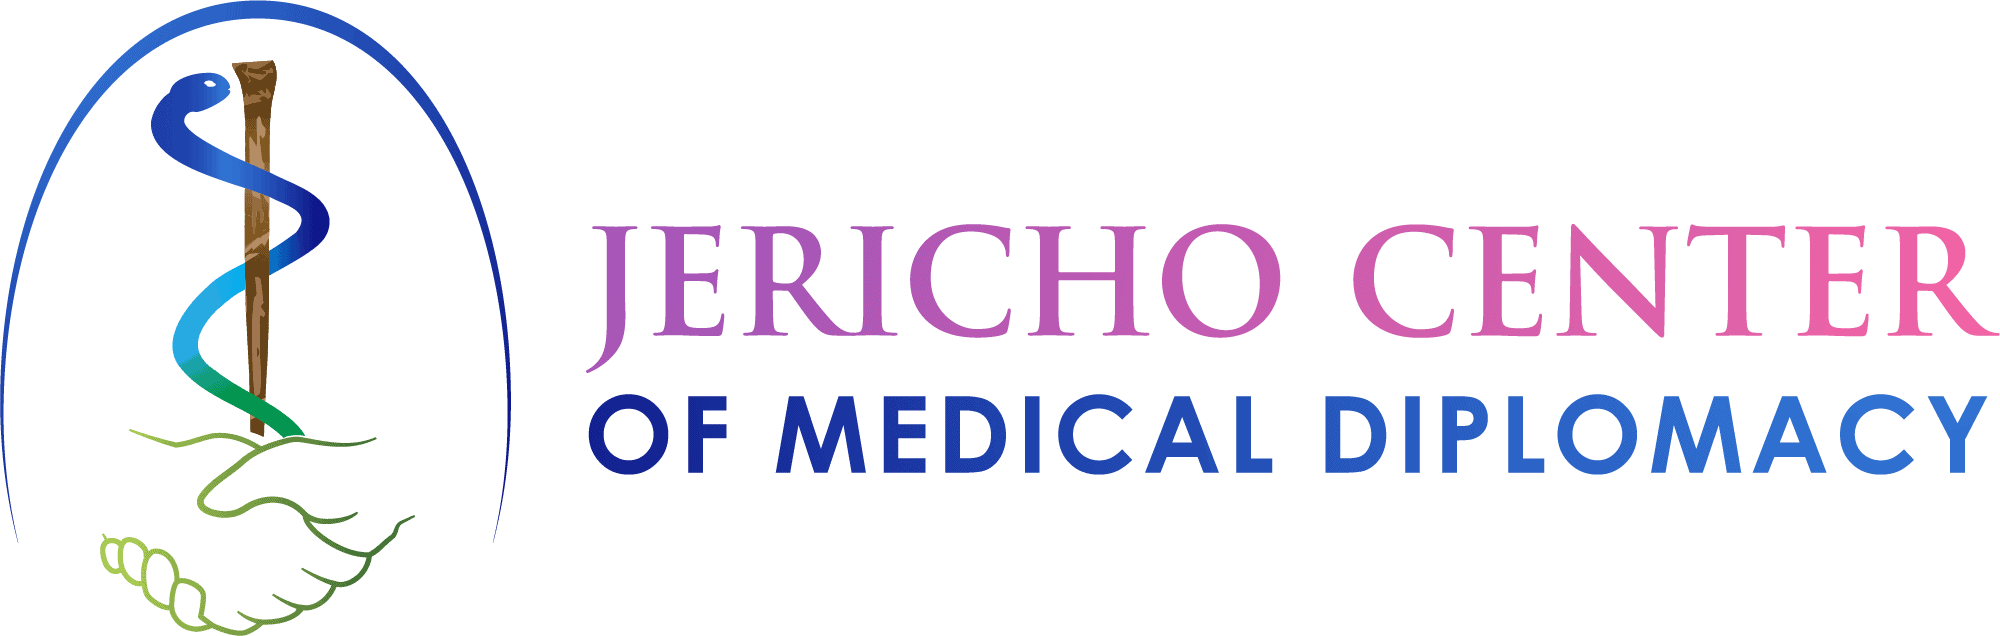 Jericho Center of Medical Diplomacy